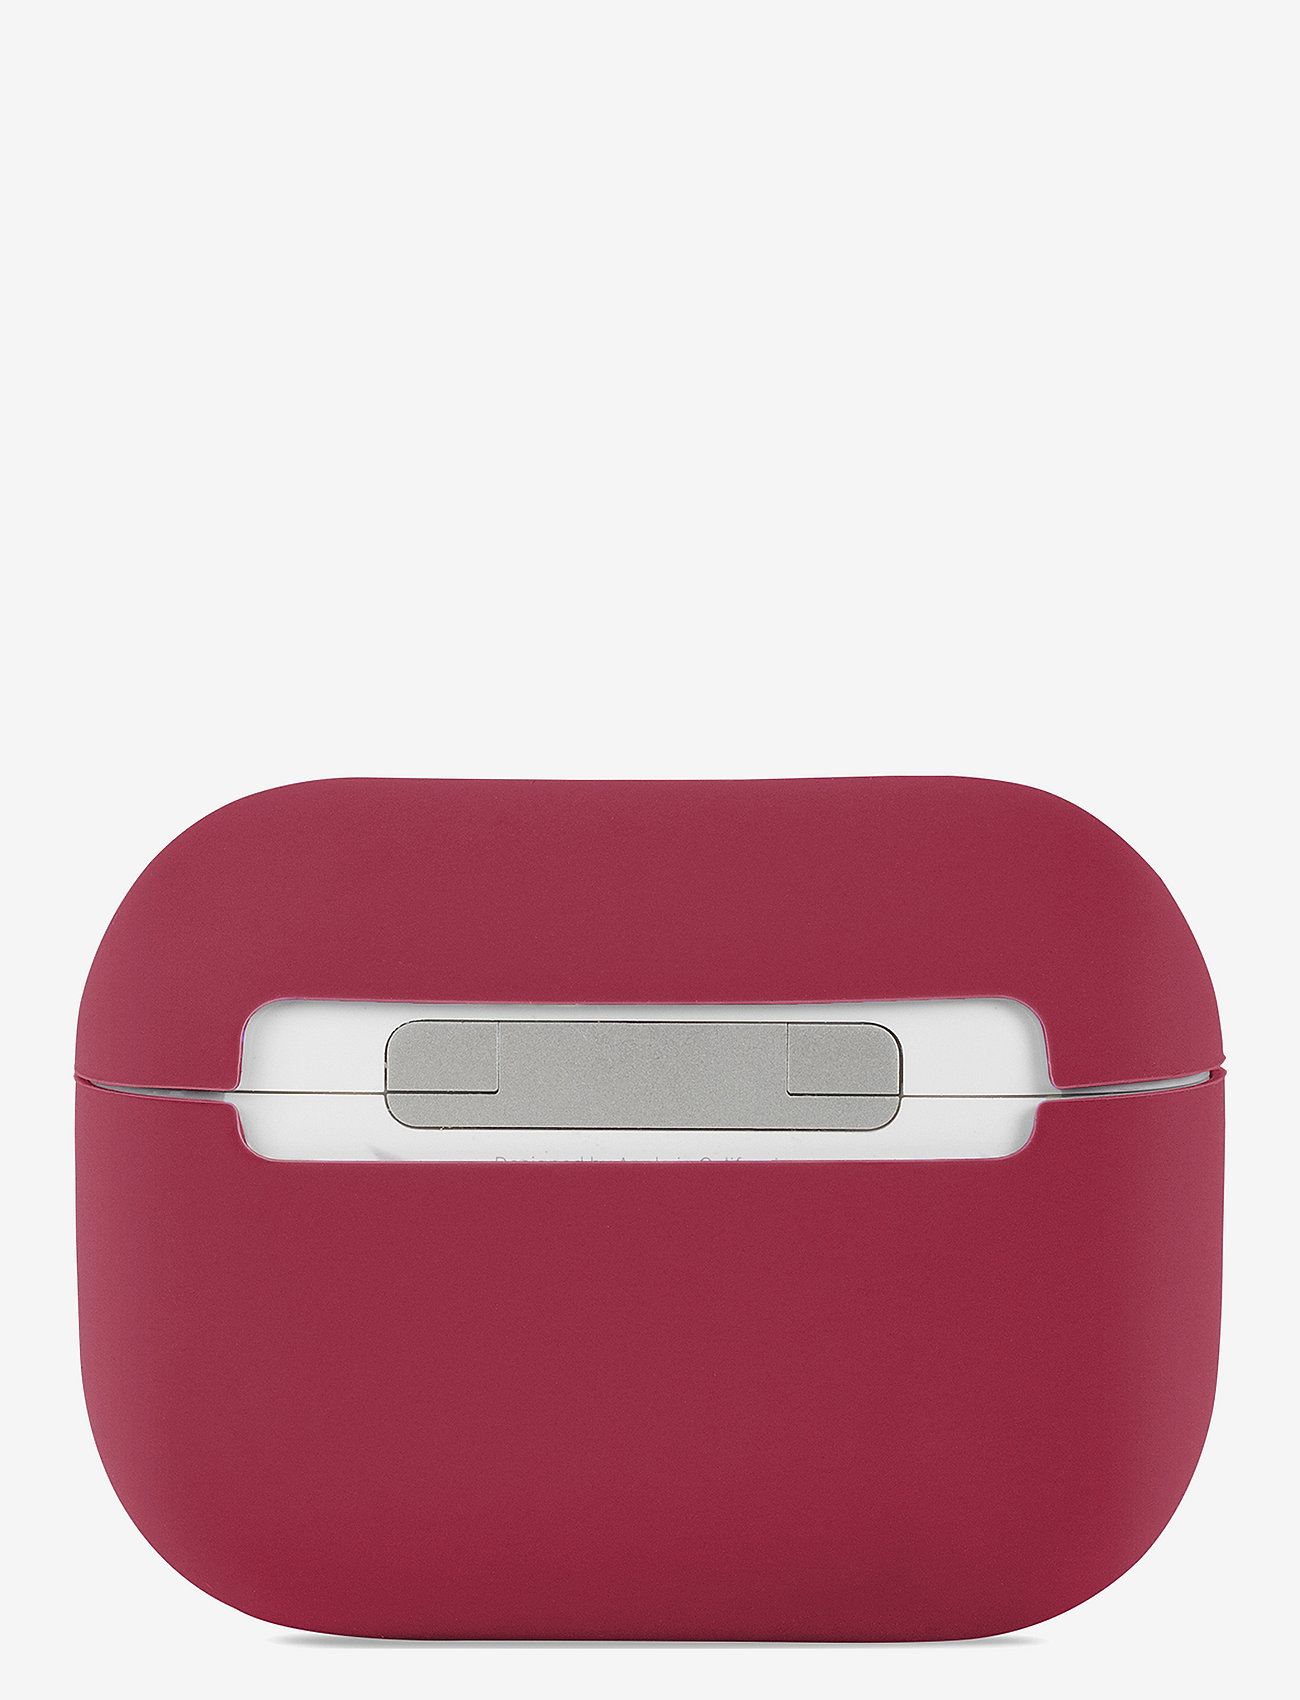 Holdit - Silicone Case AirPods Pro 1&2 - madalaimad hinnad - red velvet - 1